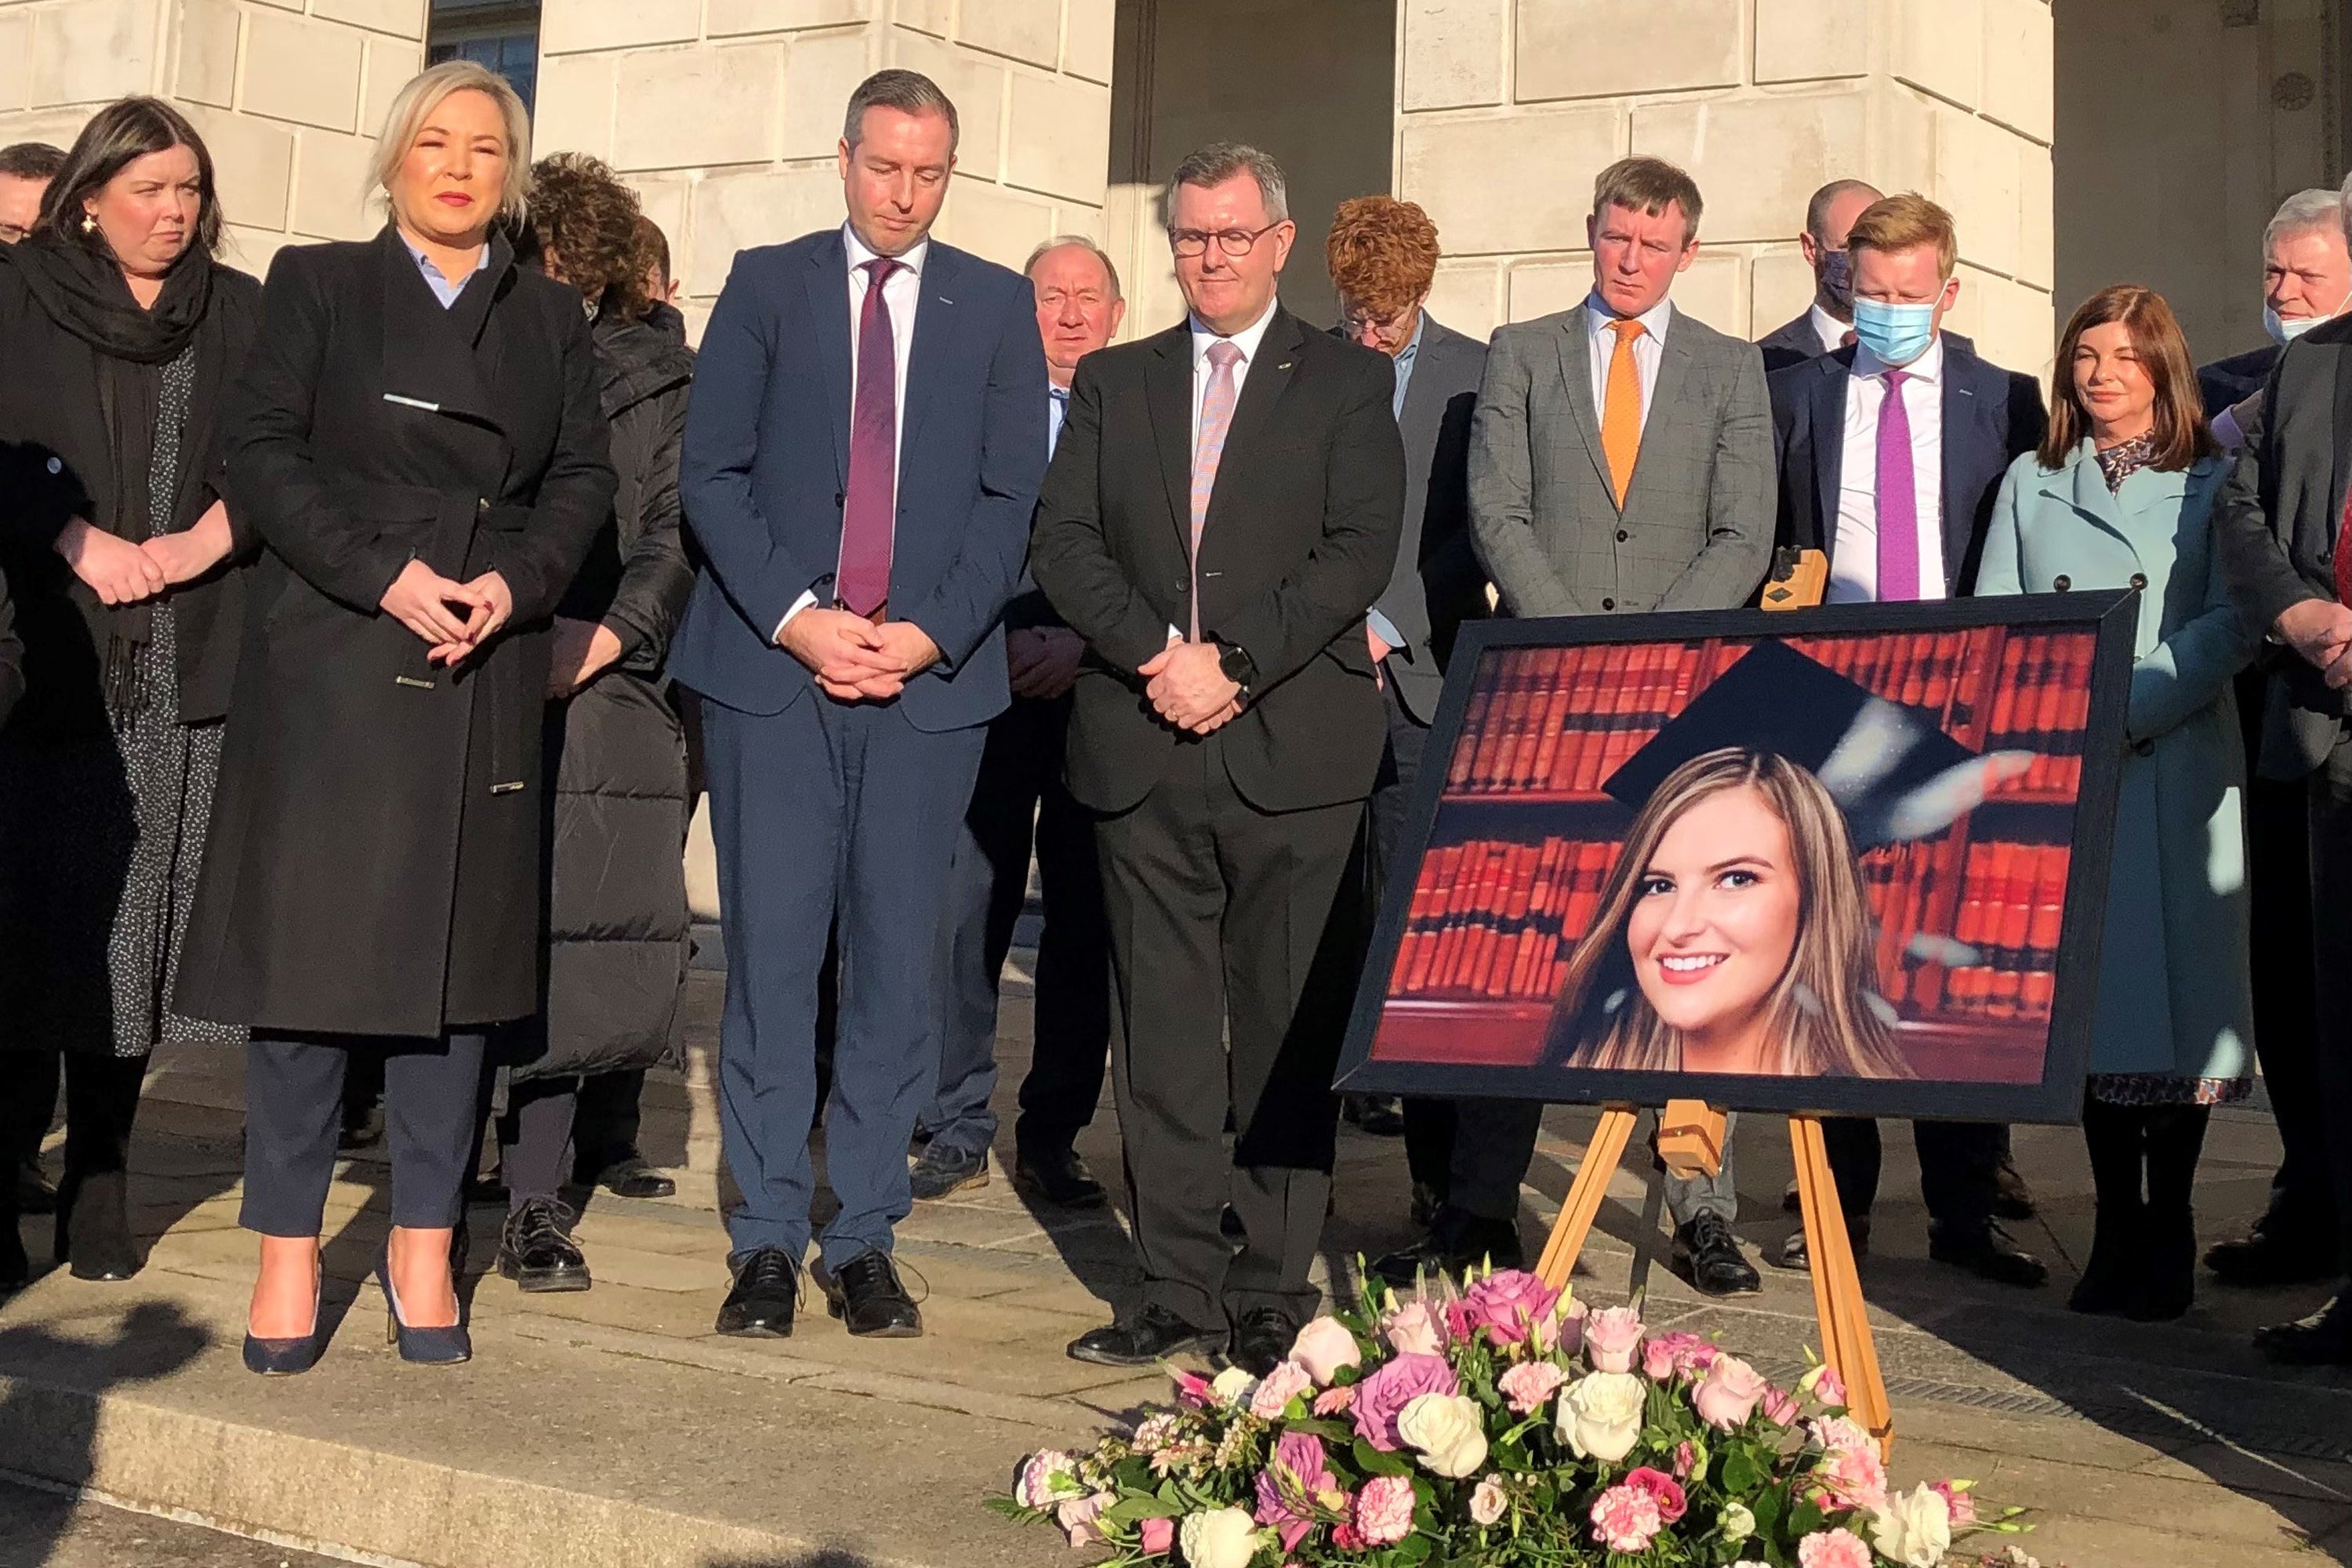 Deputy First Minister Michelle ONeill, First Minister Paul Givan and DUP leader Sir Jeffrey Donaldson were among those who took part in the vigil outside Stormont (David Young/PA)